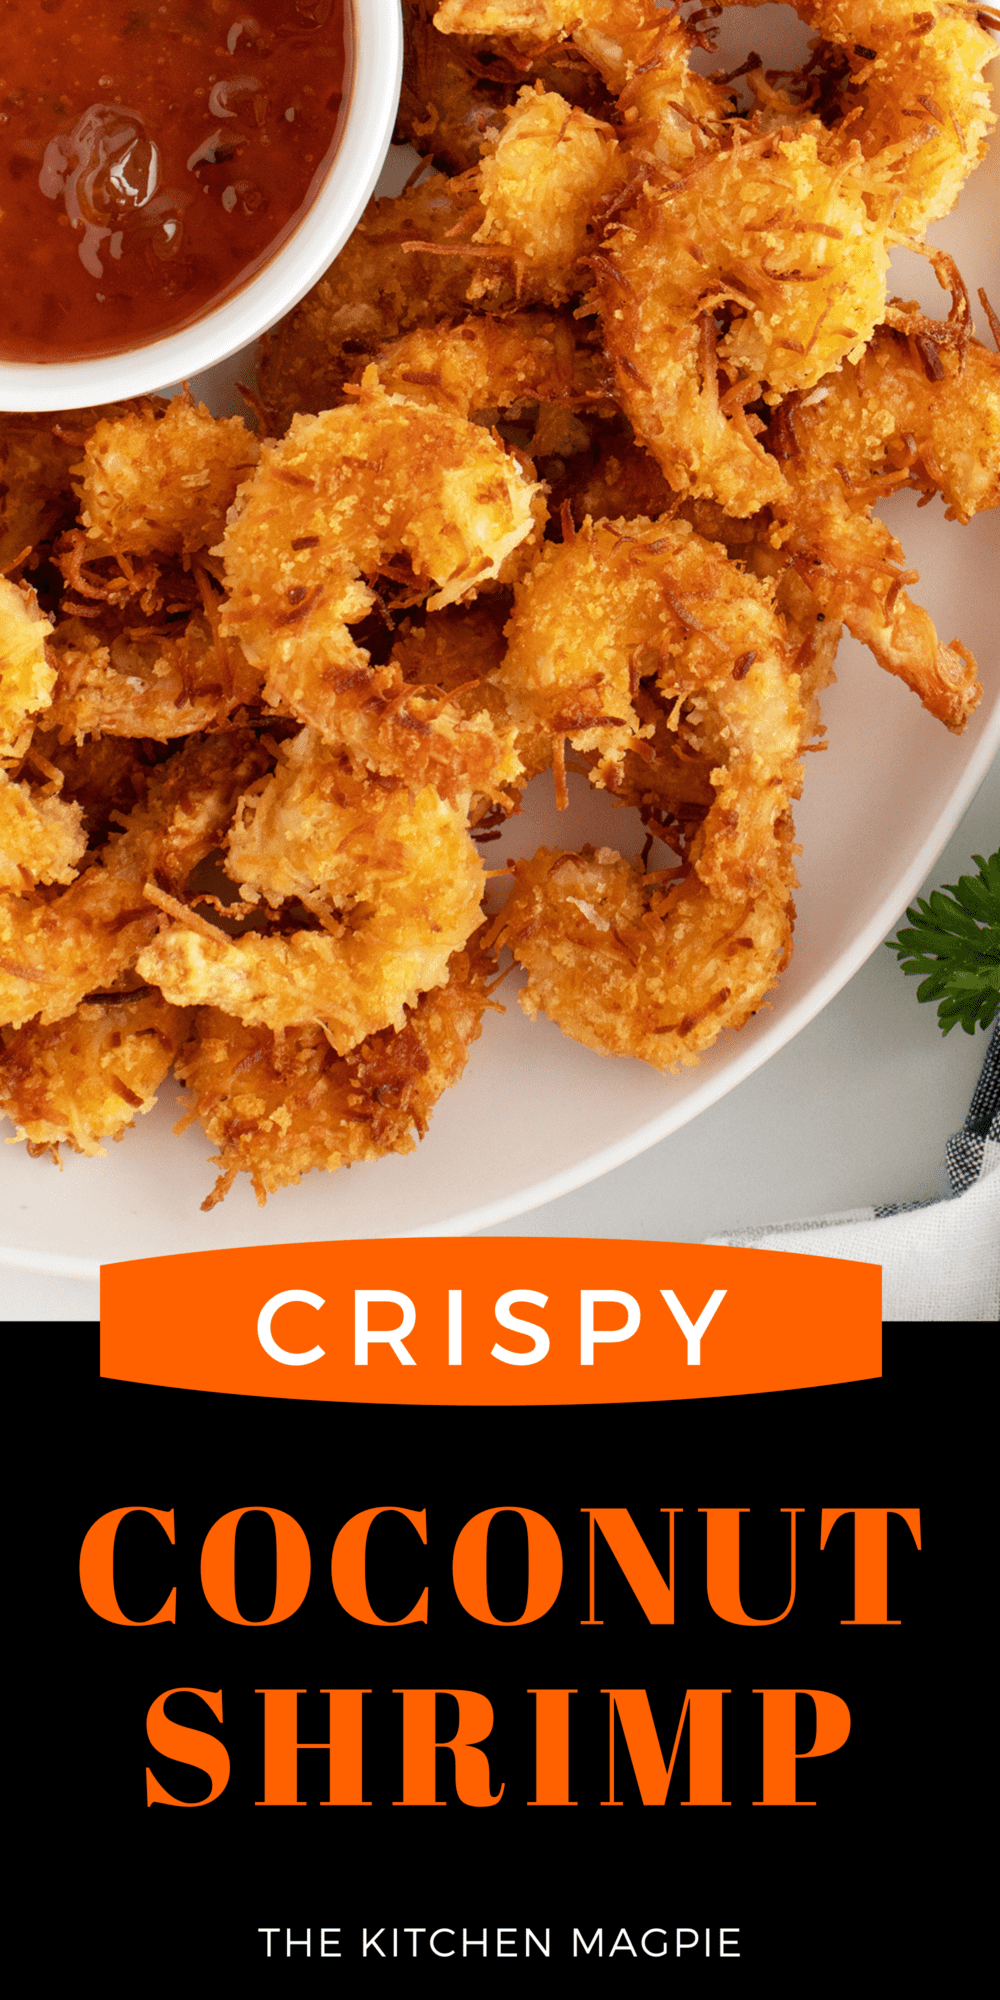 Crunchy, oddly sweet, and somehow also very savory and satisfying, this coconut shrimp is a great appetizer.